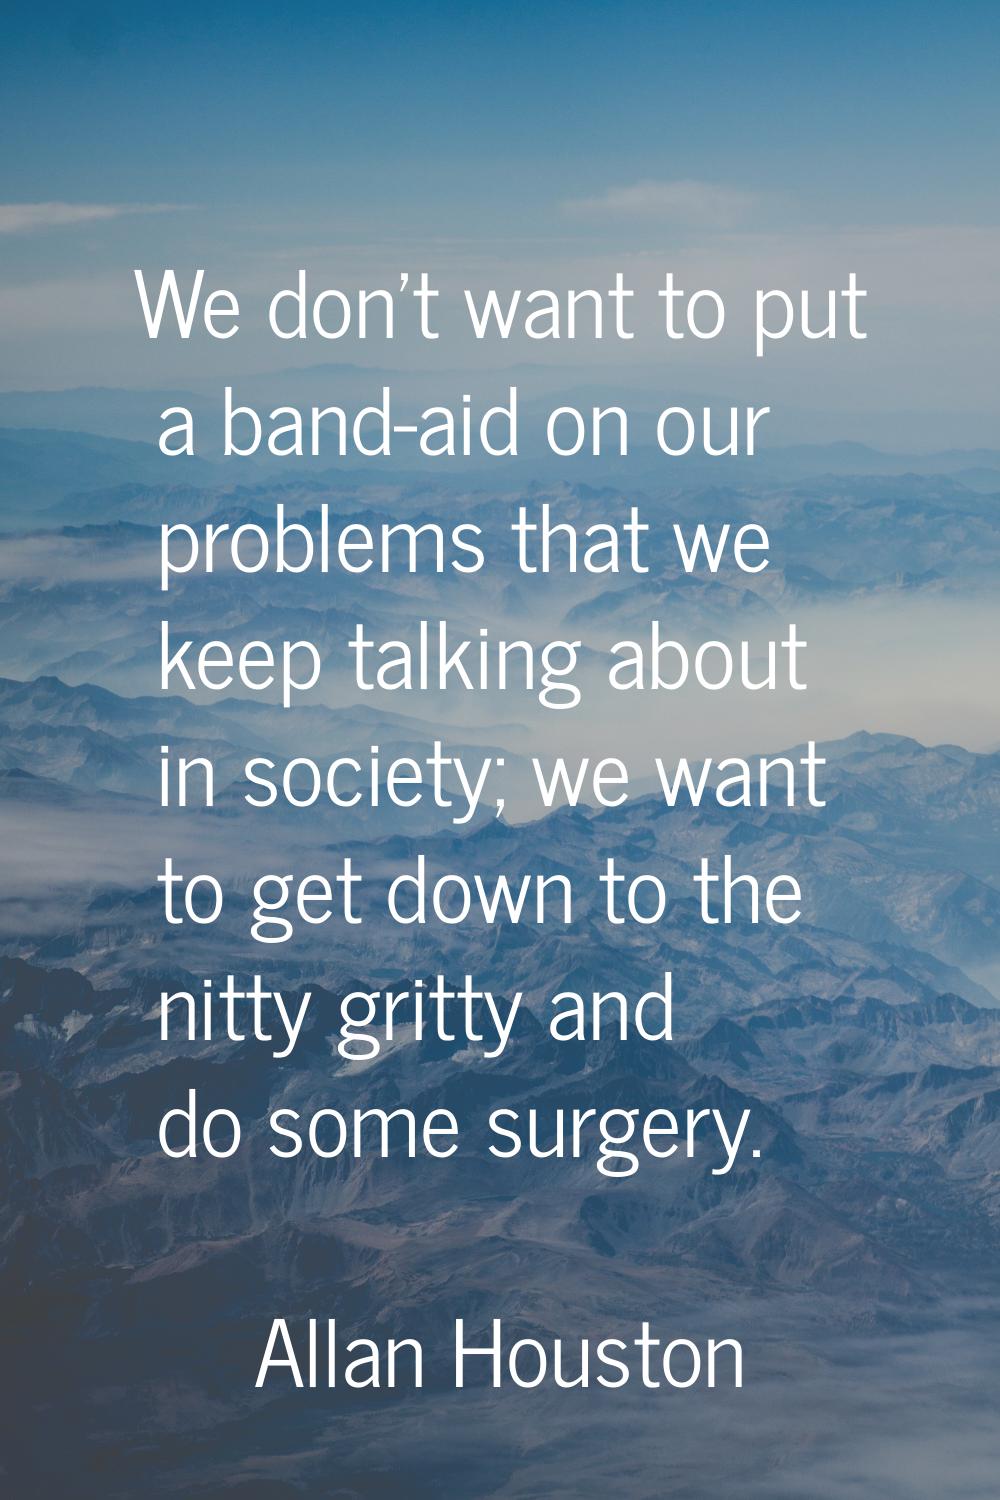 We don't want to put a band-aid on our problems that we keep talking about in society; we want to g